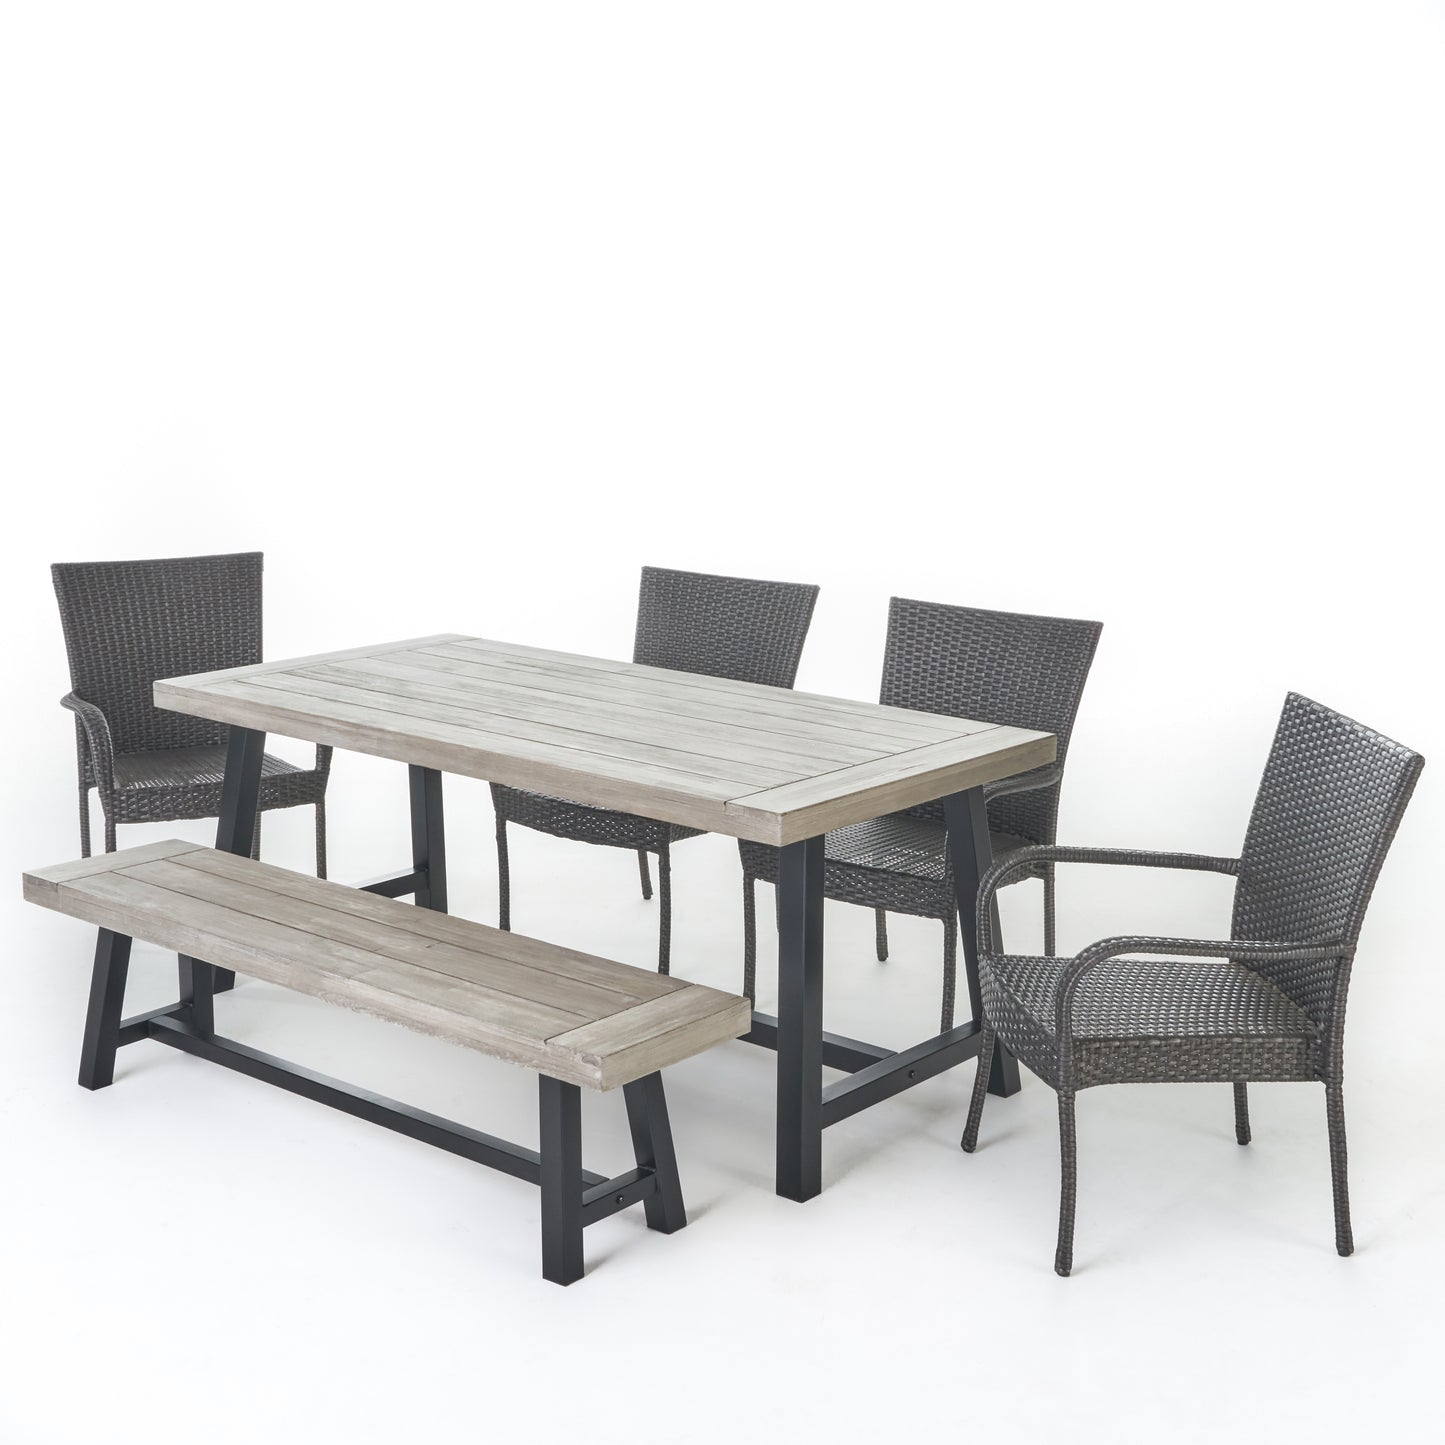 Luminous Outdoor 6 Piece Stacking Wicker Dining Set with Acacia Wood Table and Bench